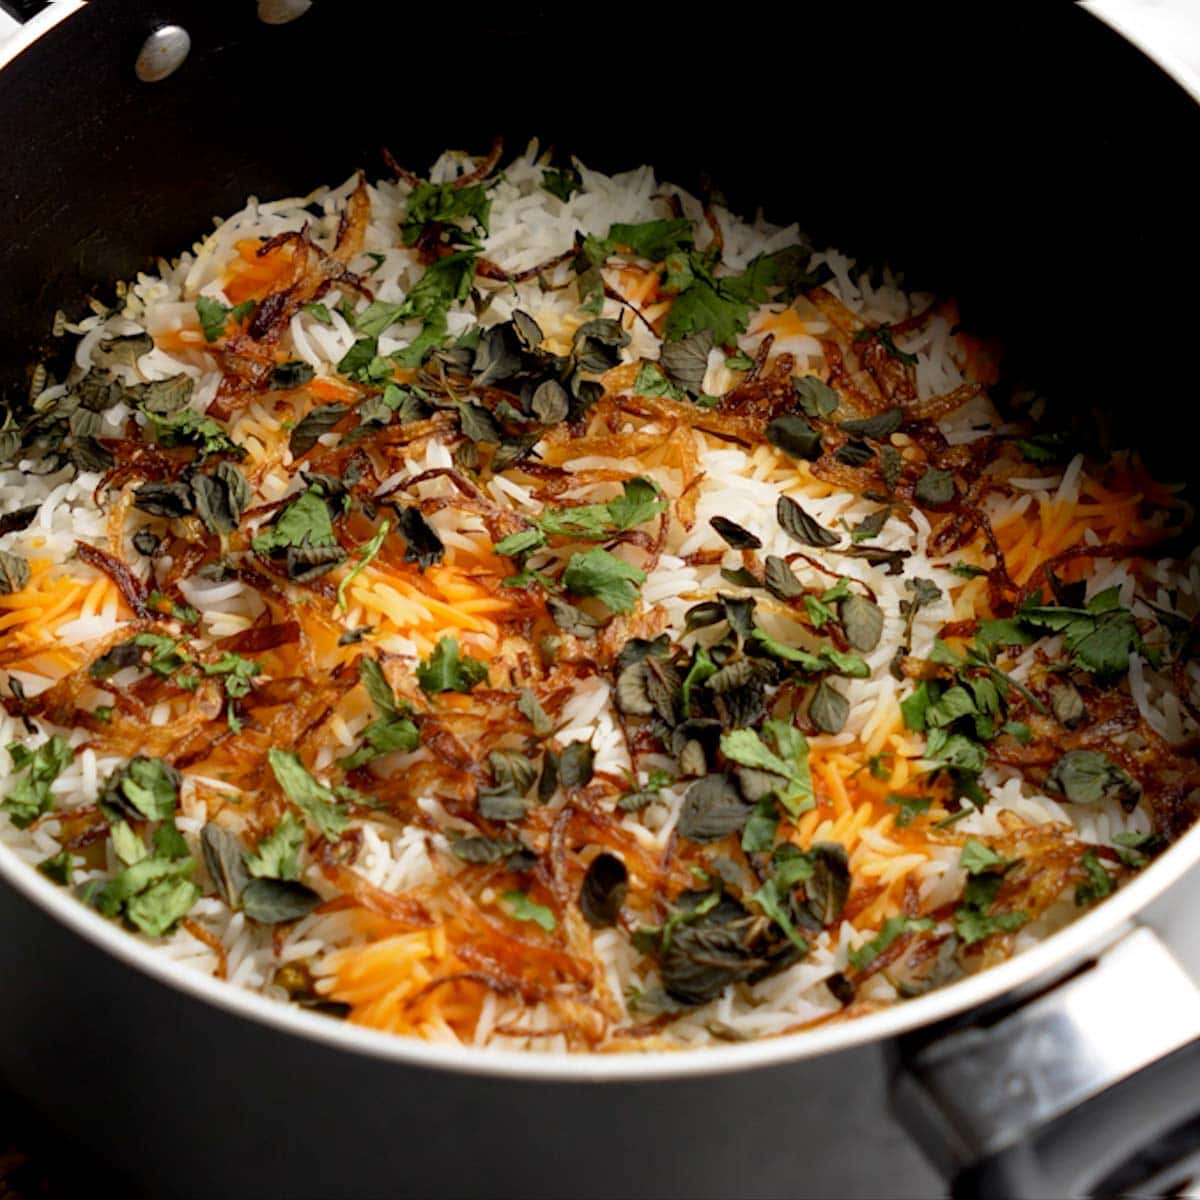 Cooked Chicken Biryani garnished with birista, cilantro, and mint leaves in a pot